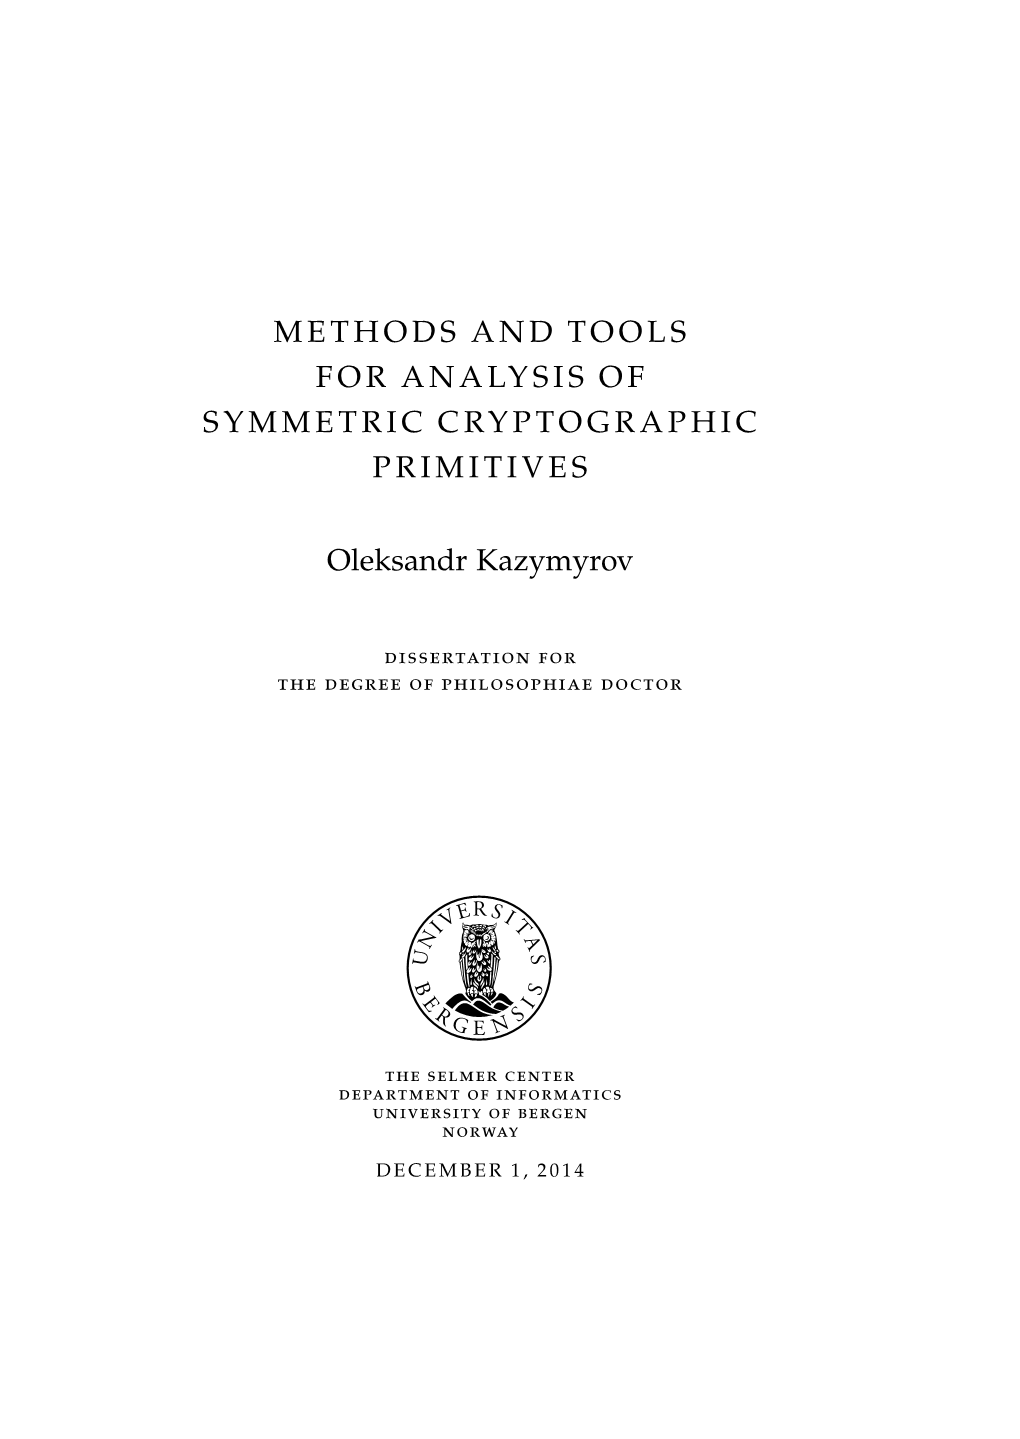 Methods and Tools for Analysis of Symmetric Cryptographic Primitives